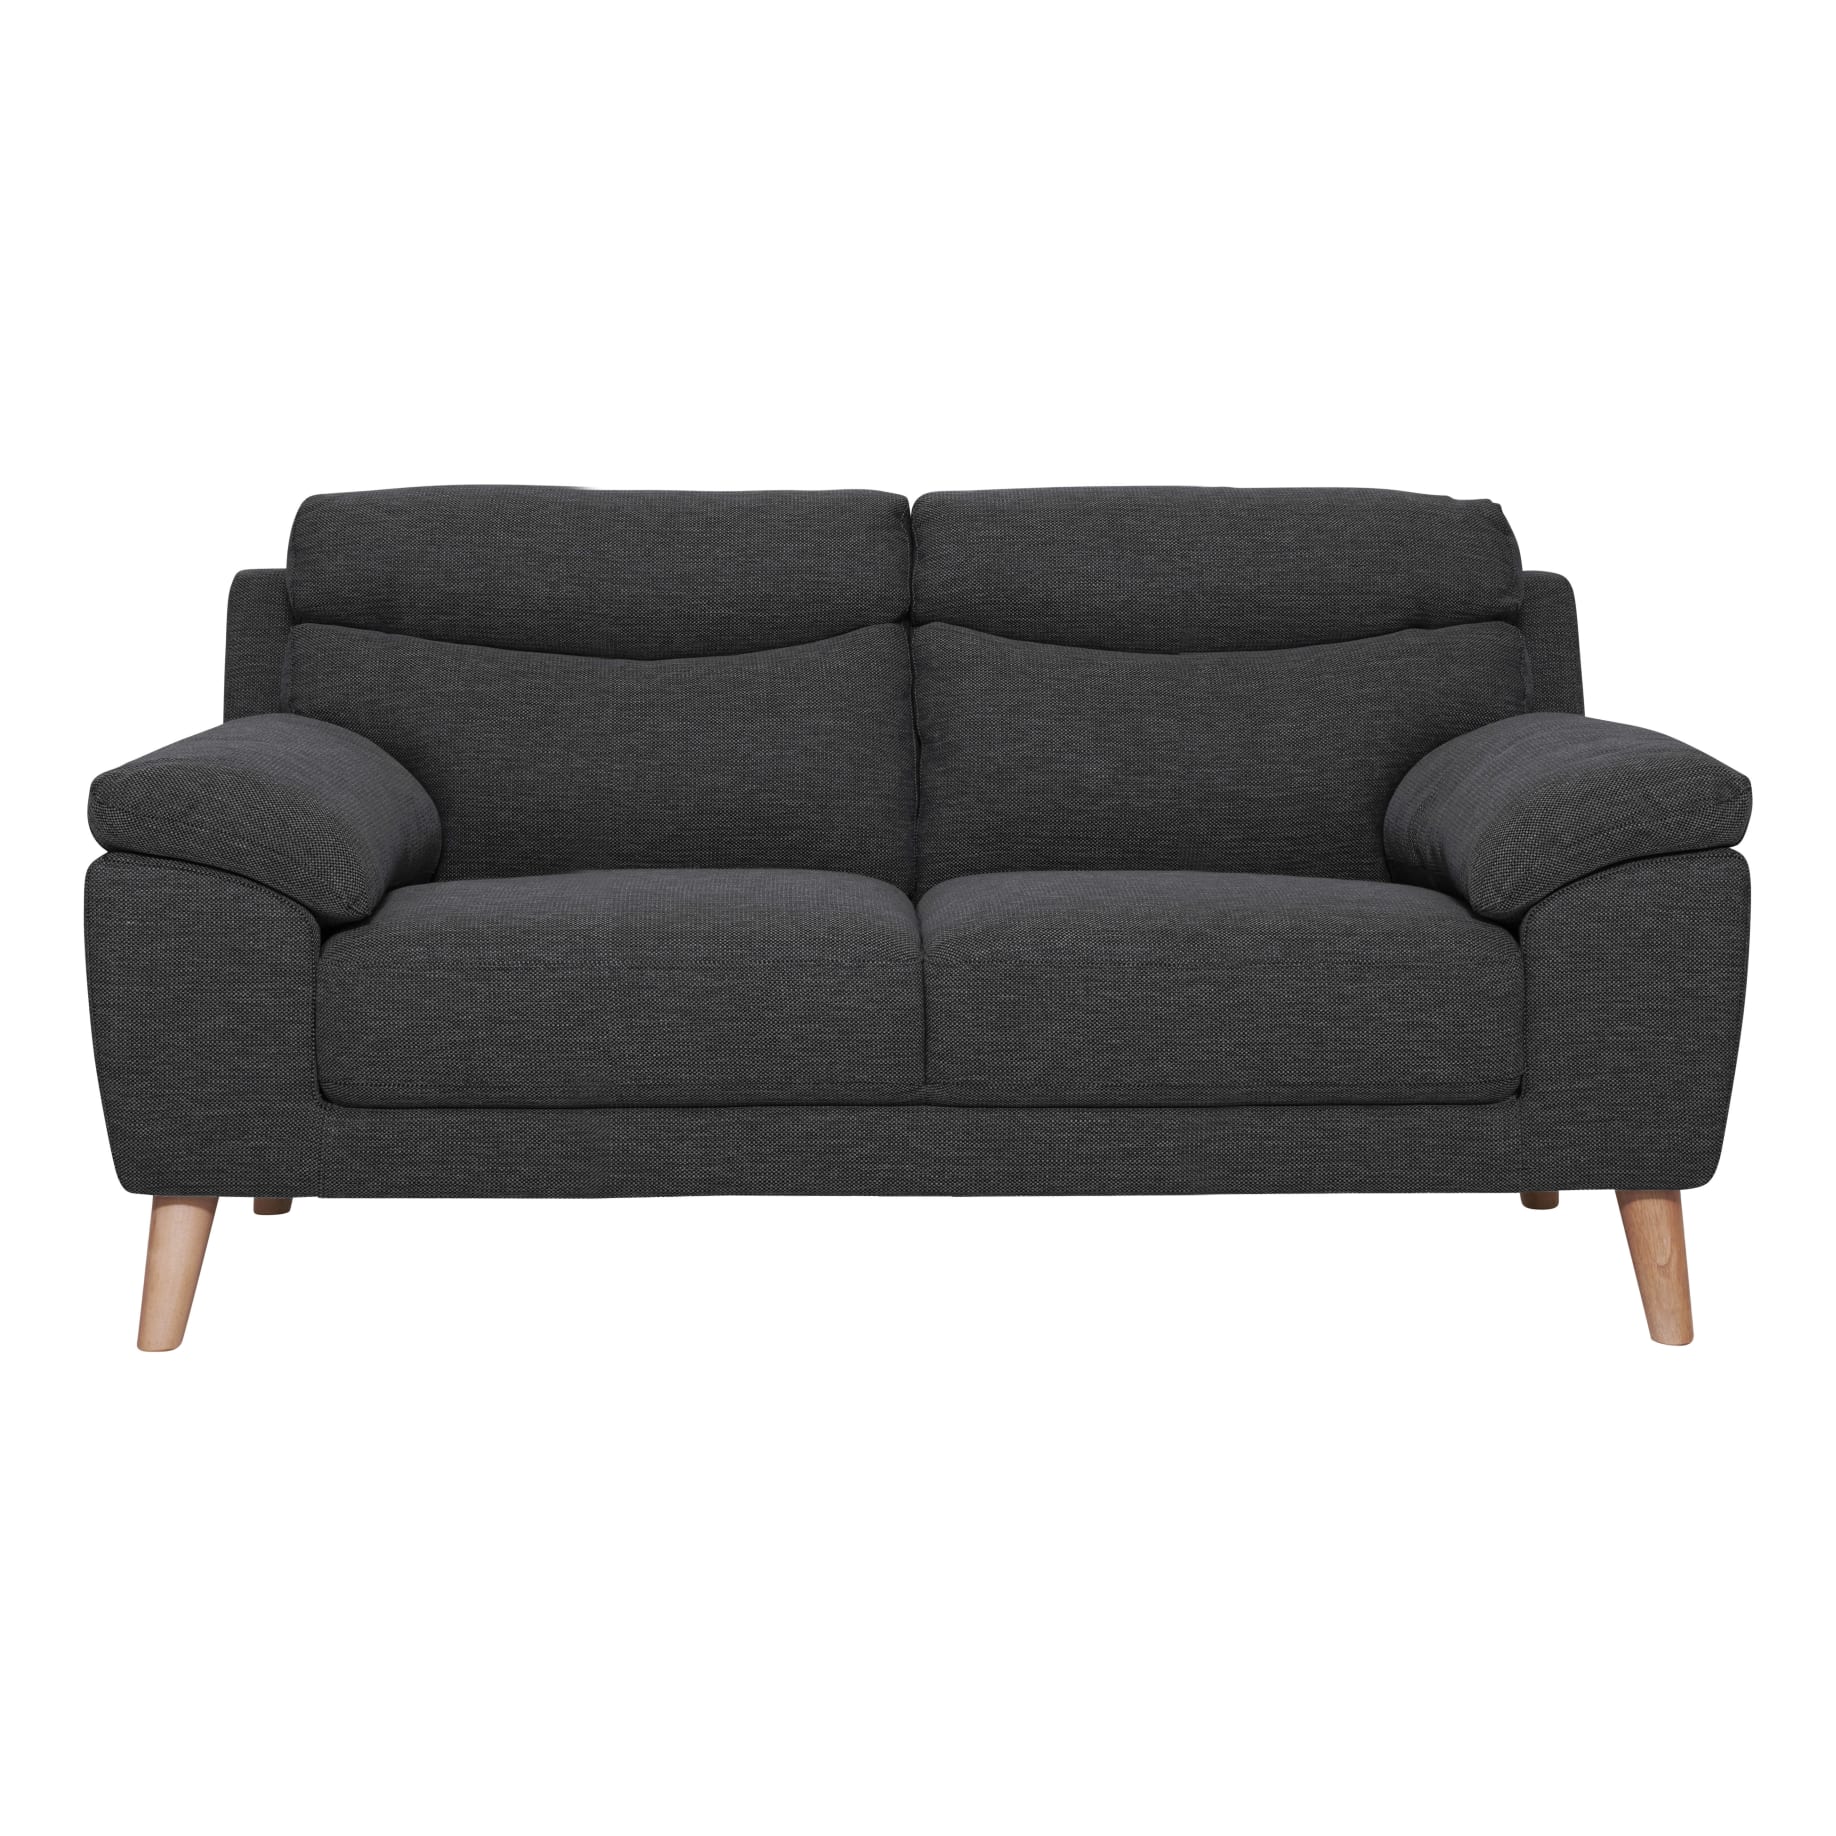 Bronco 2 Seater Sofa in Talent Charcoal